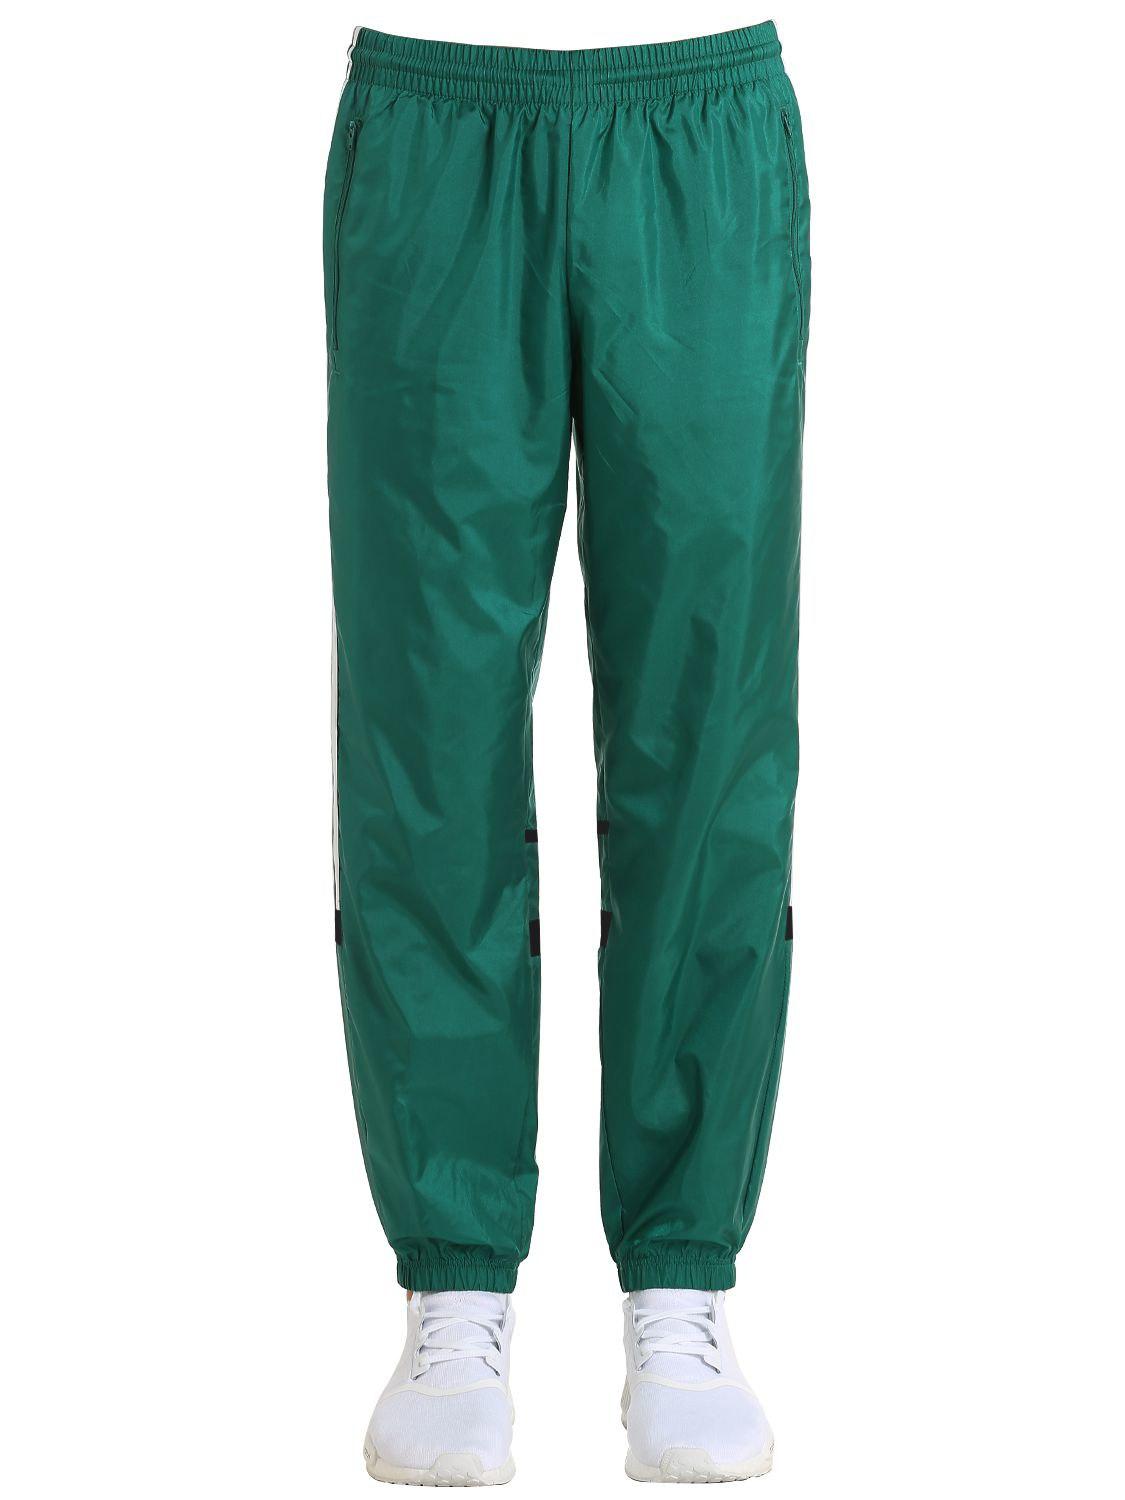 adidas Originals Synthetic Clr-84 Woven Nylon Track Pants in Green for ...